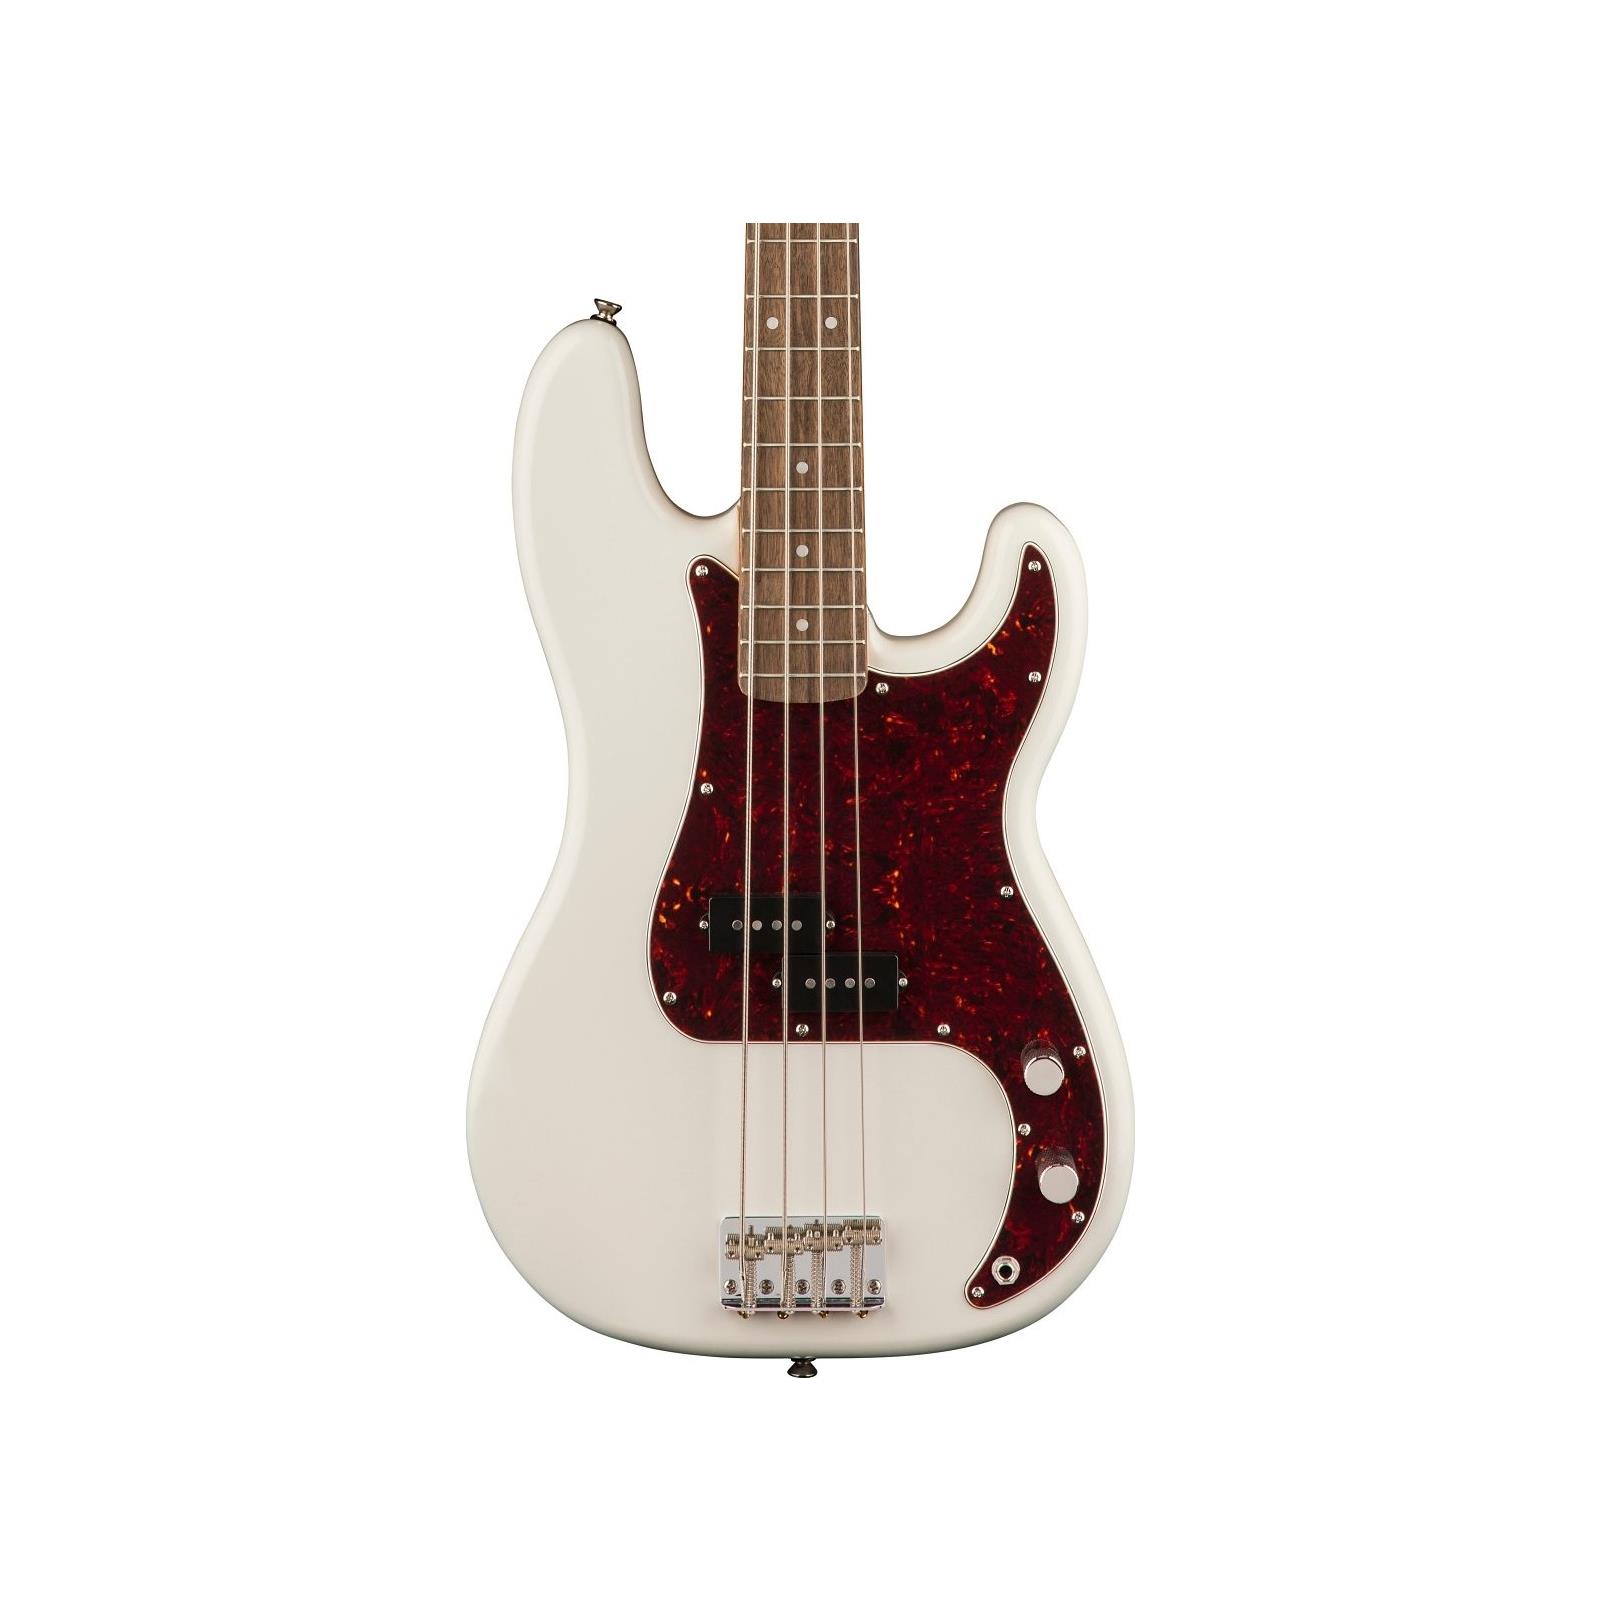 Squier Classic Vibe '60s Precision Bass, Laurel Fingerboard, Olympic White